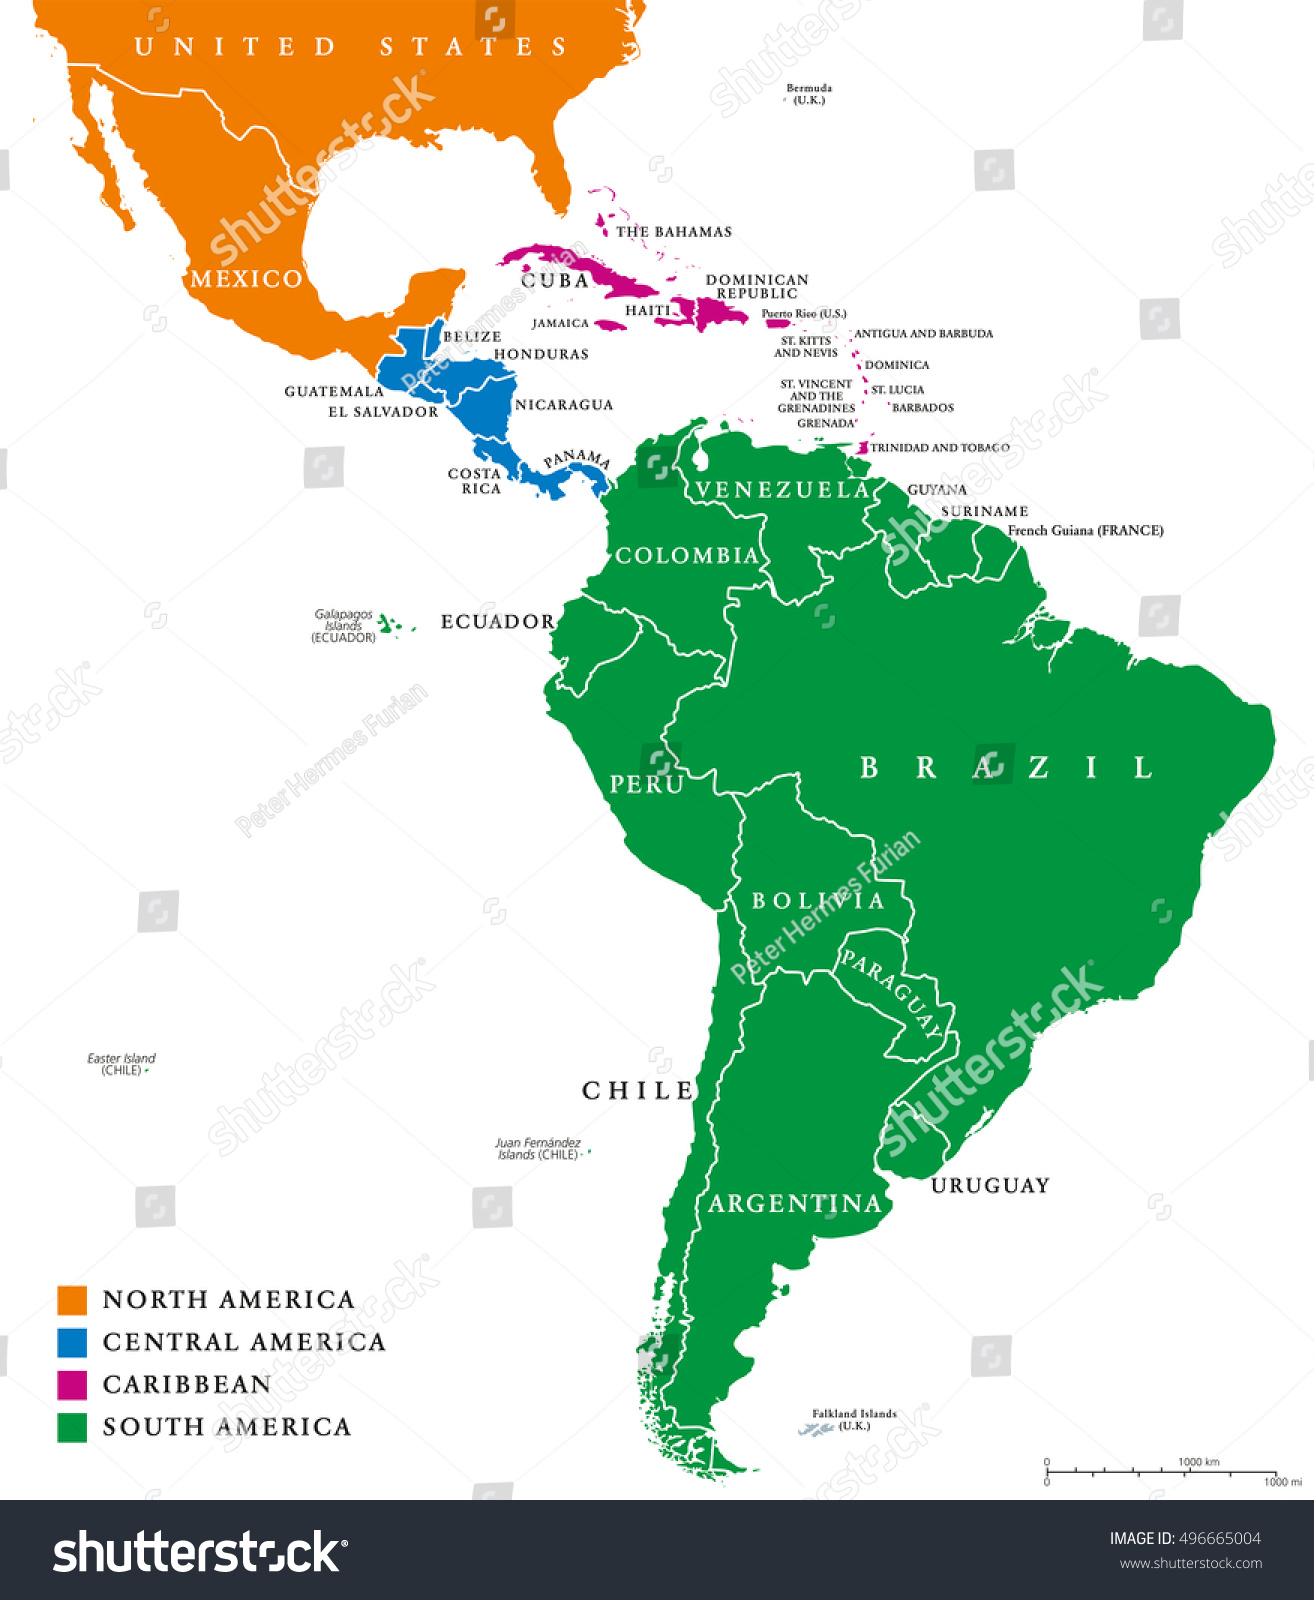 south america and central america map Latin America Regions Map Subregions Caribbean Stock Vector south america and central america map